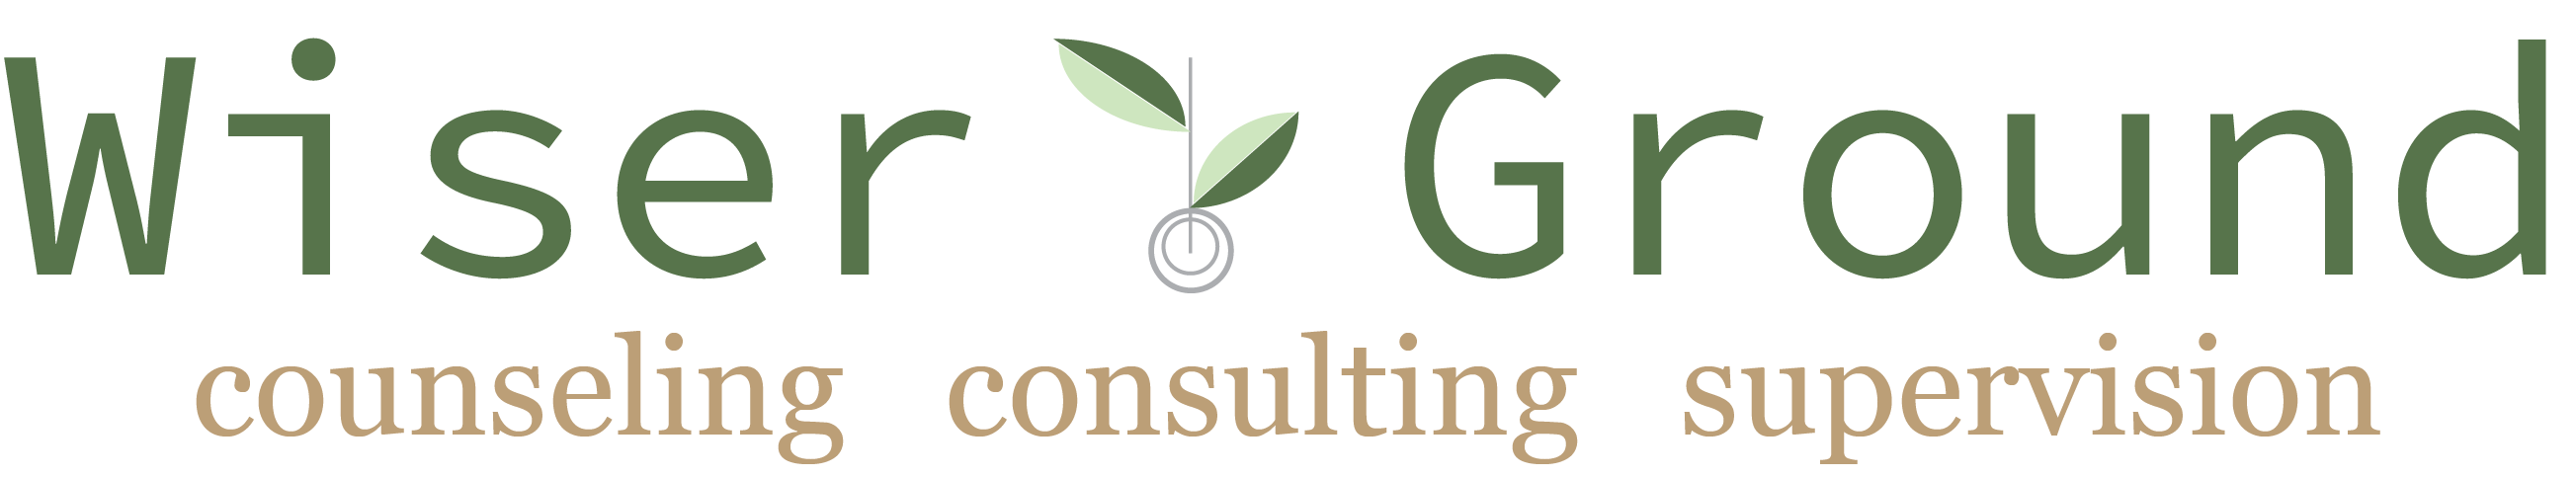 Wiser Ground | Counseling | Consulting | Supervision | Atlanta, GA